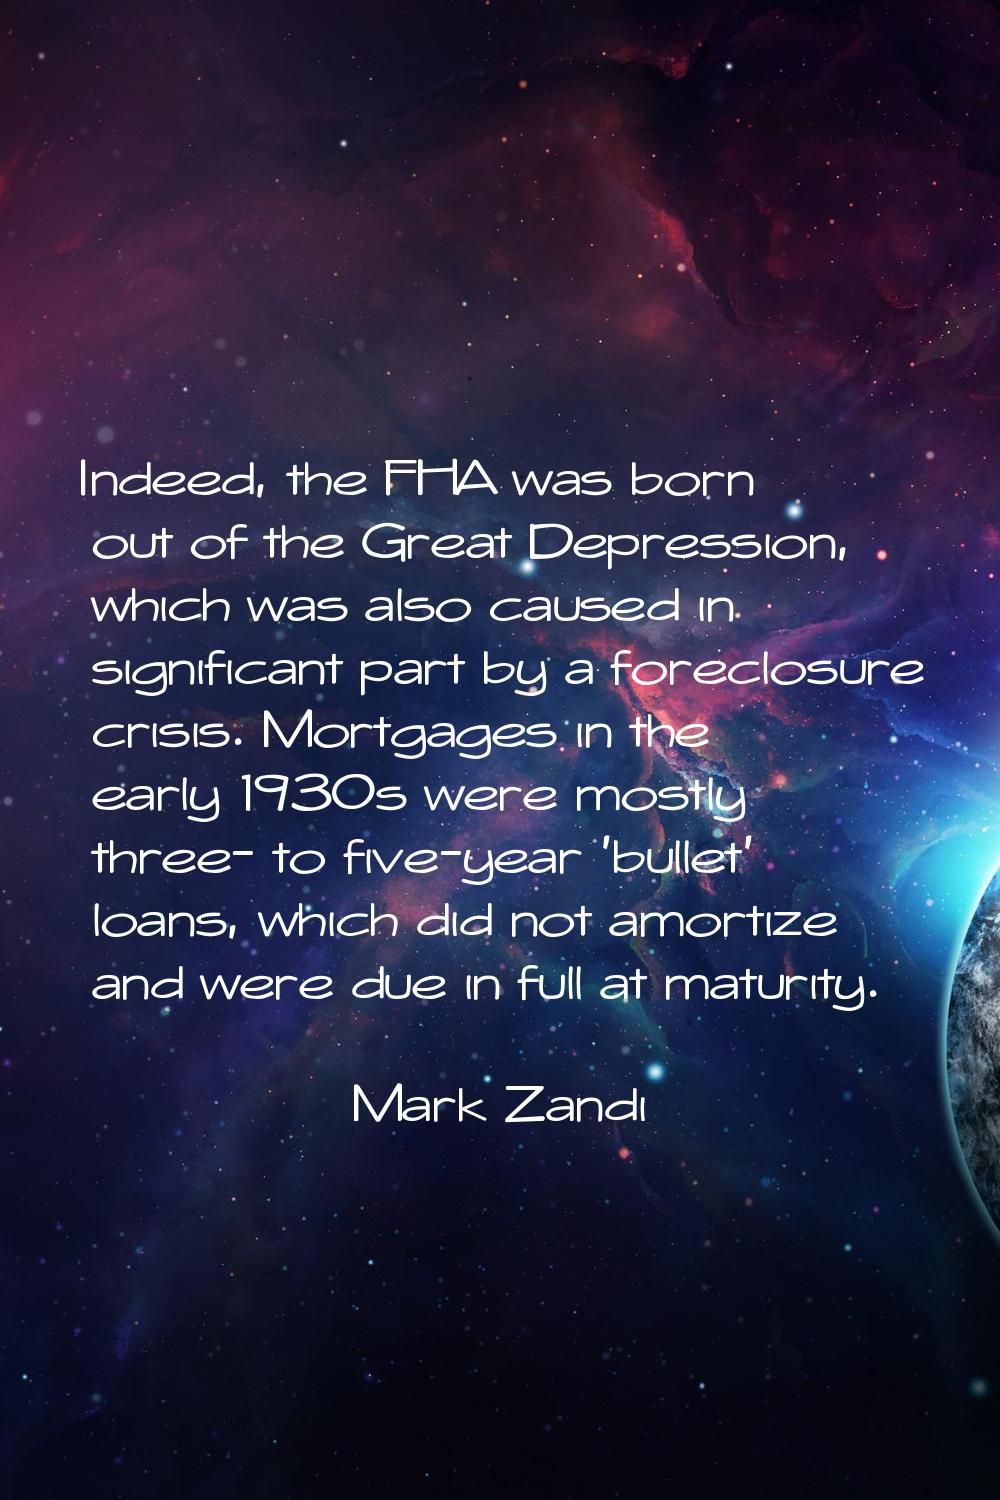 Indeed, the FHA was born out of the Great Depression, which was also caused in significant part by 